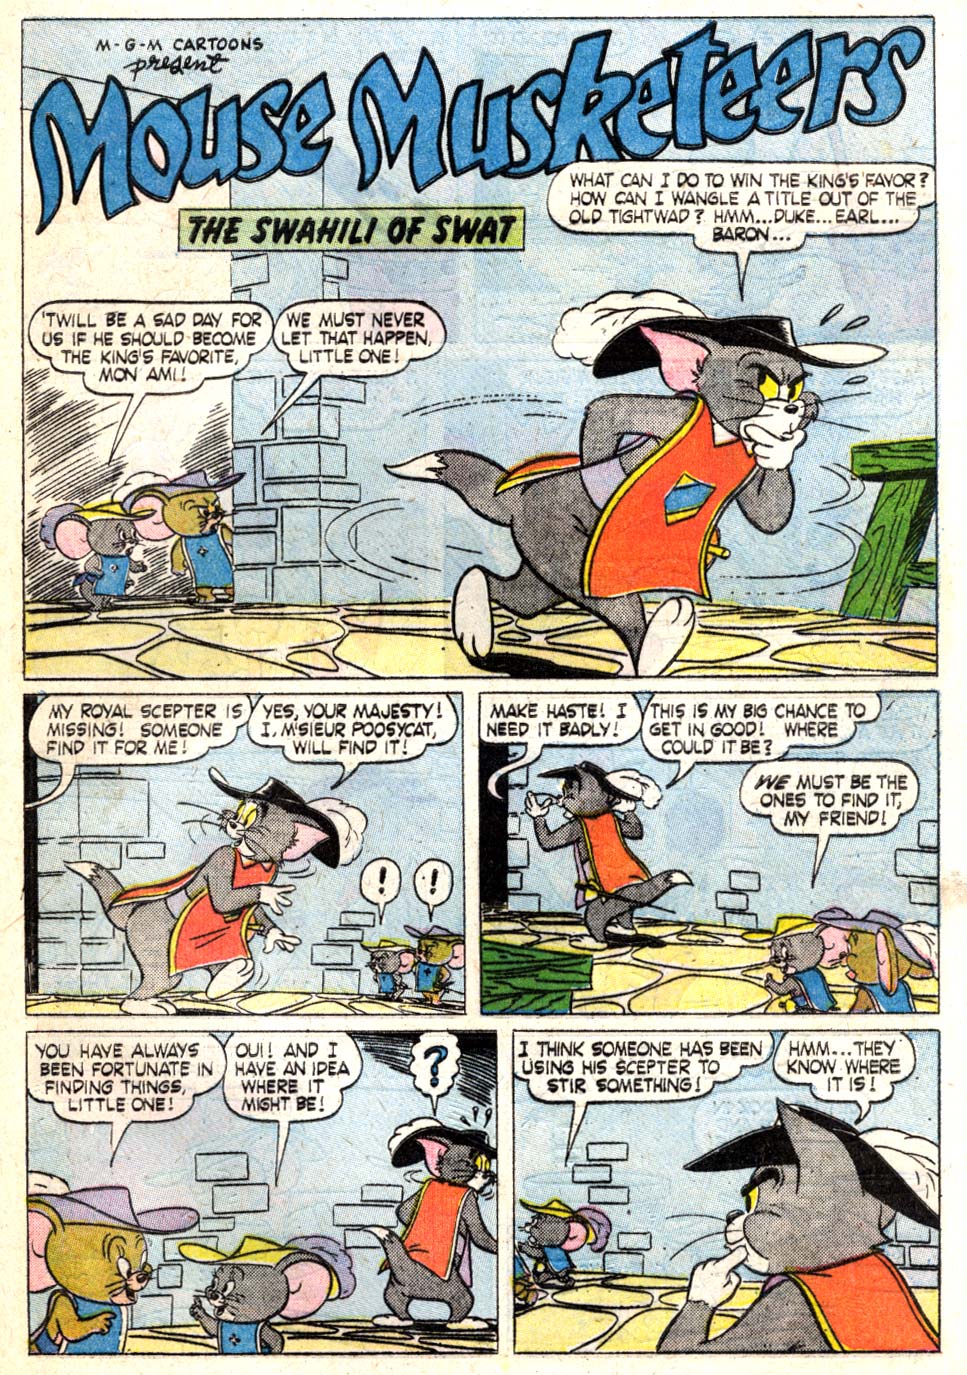 Read online M.G.M's The Mouse Musketeers comic -  Issue #19 - 29